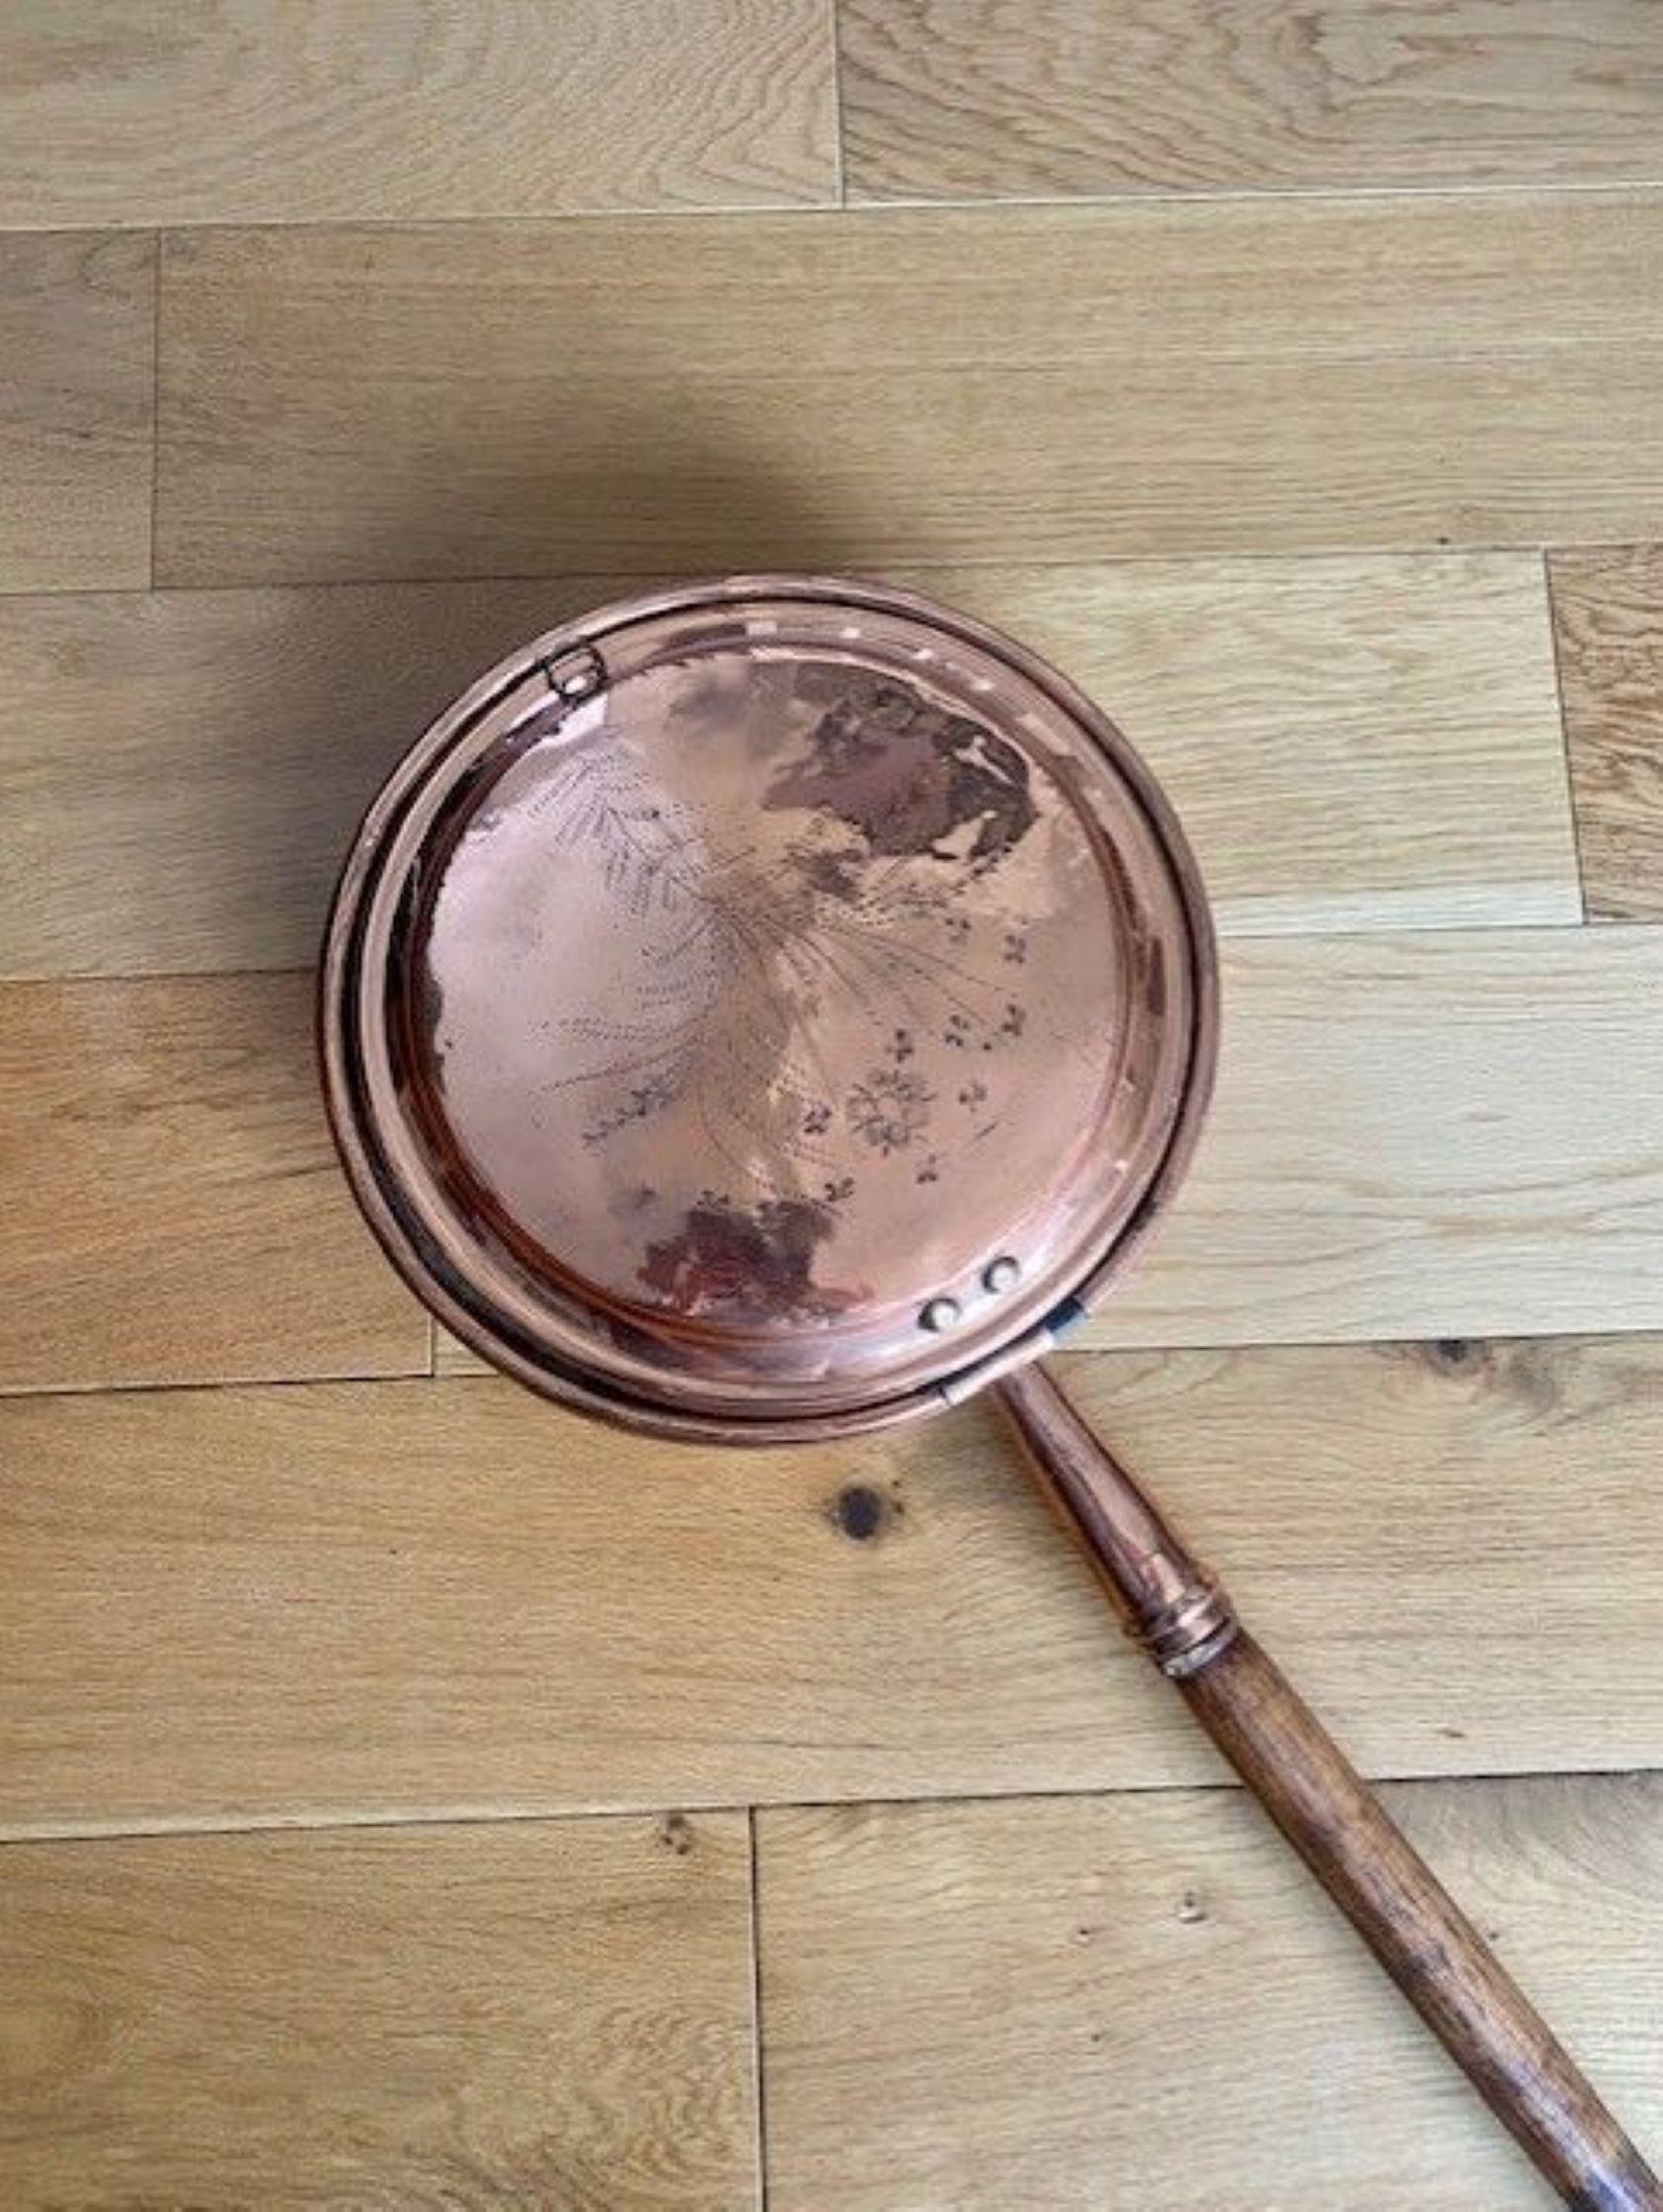 Antique George III Copper Warming Pan having the original turned handle, copper warming warming pan with a lift up lid